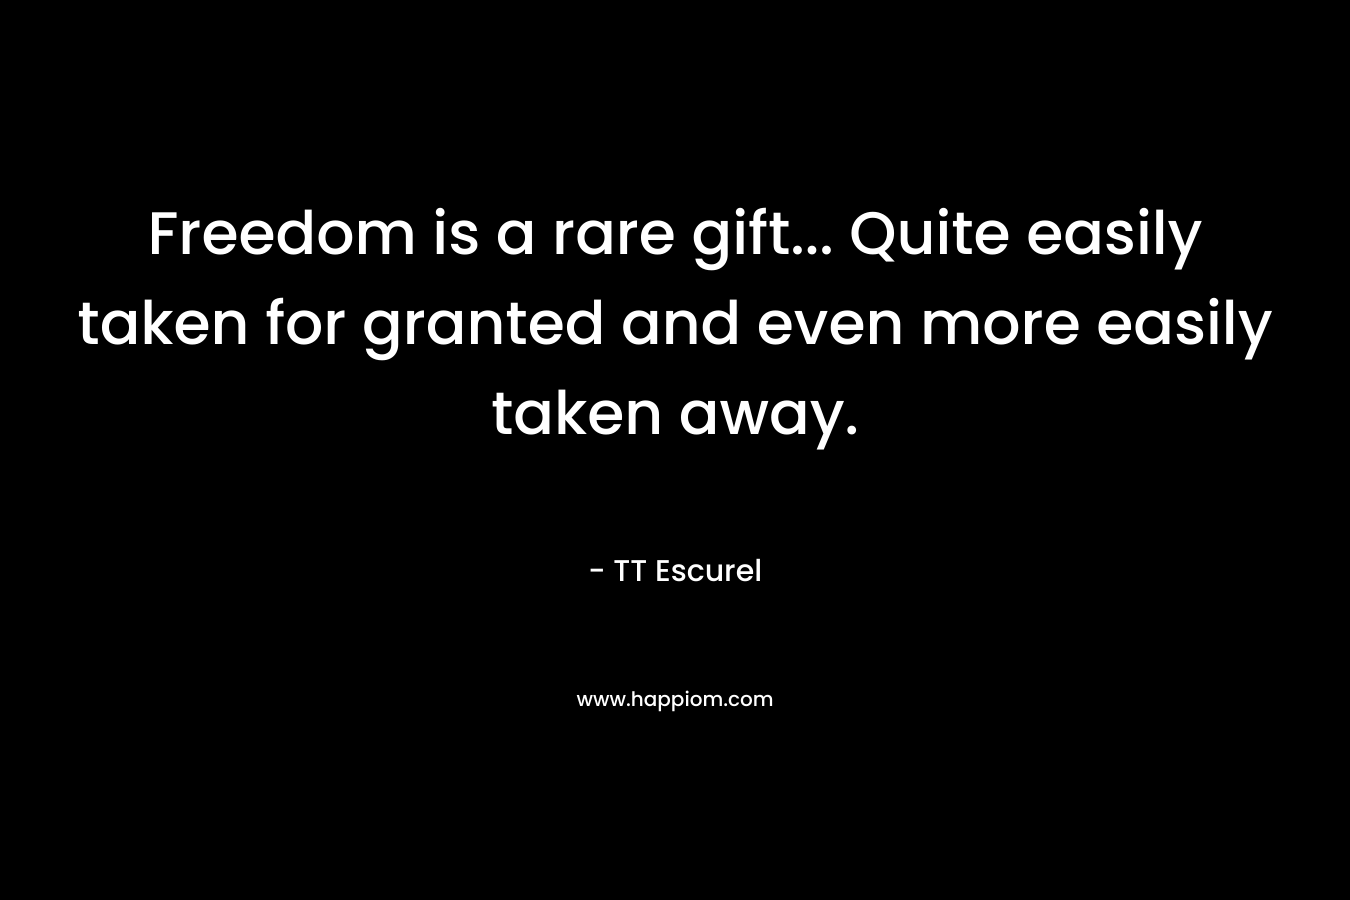 Freedom is a rare gift... Quite easily taken for granted and even more easily taken away.